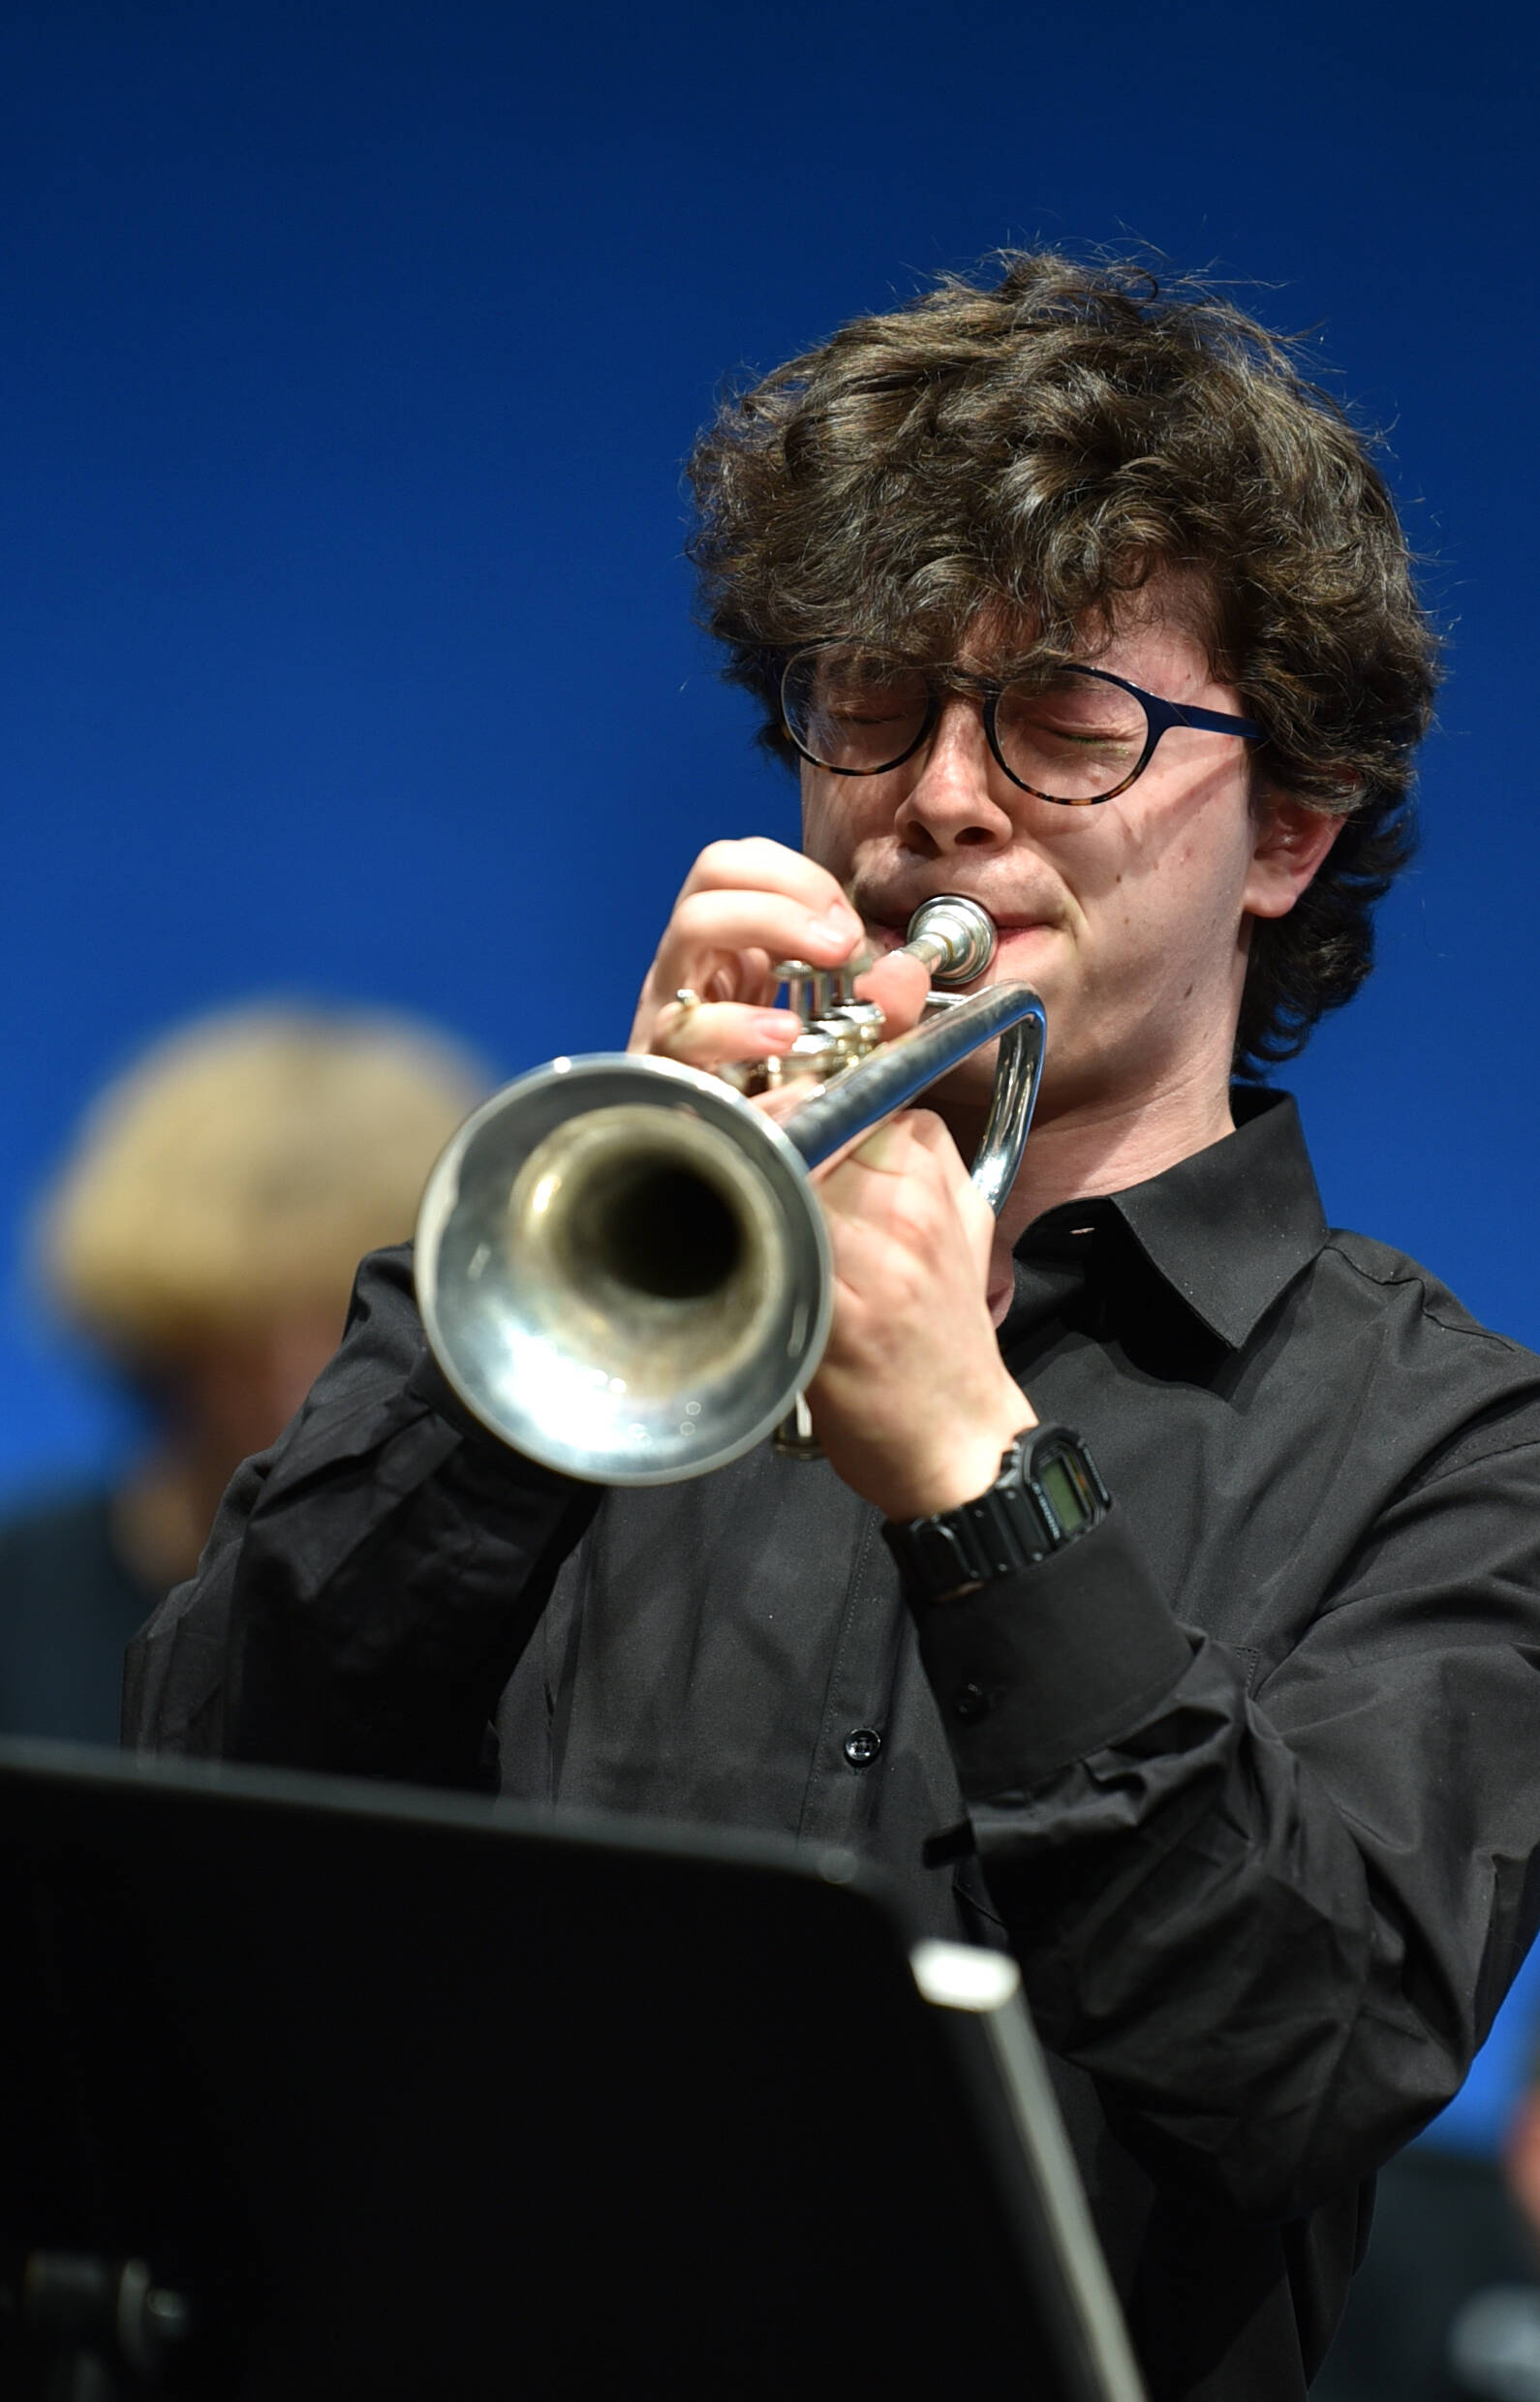 Lincoln High School senior Joe Friedman plays the trumpet with the All-Star Jazz Band.